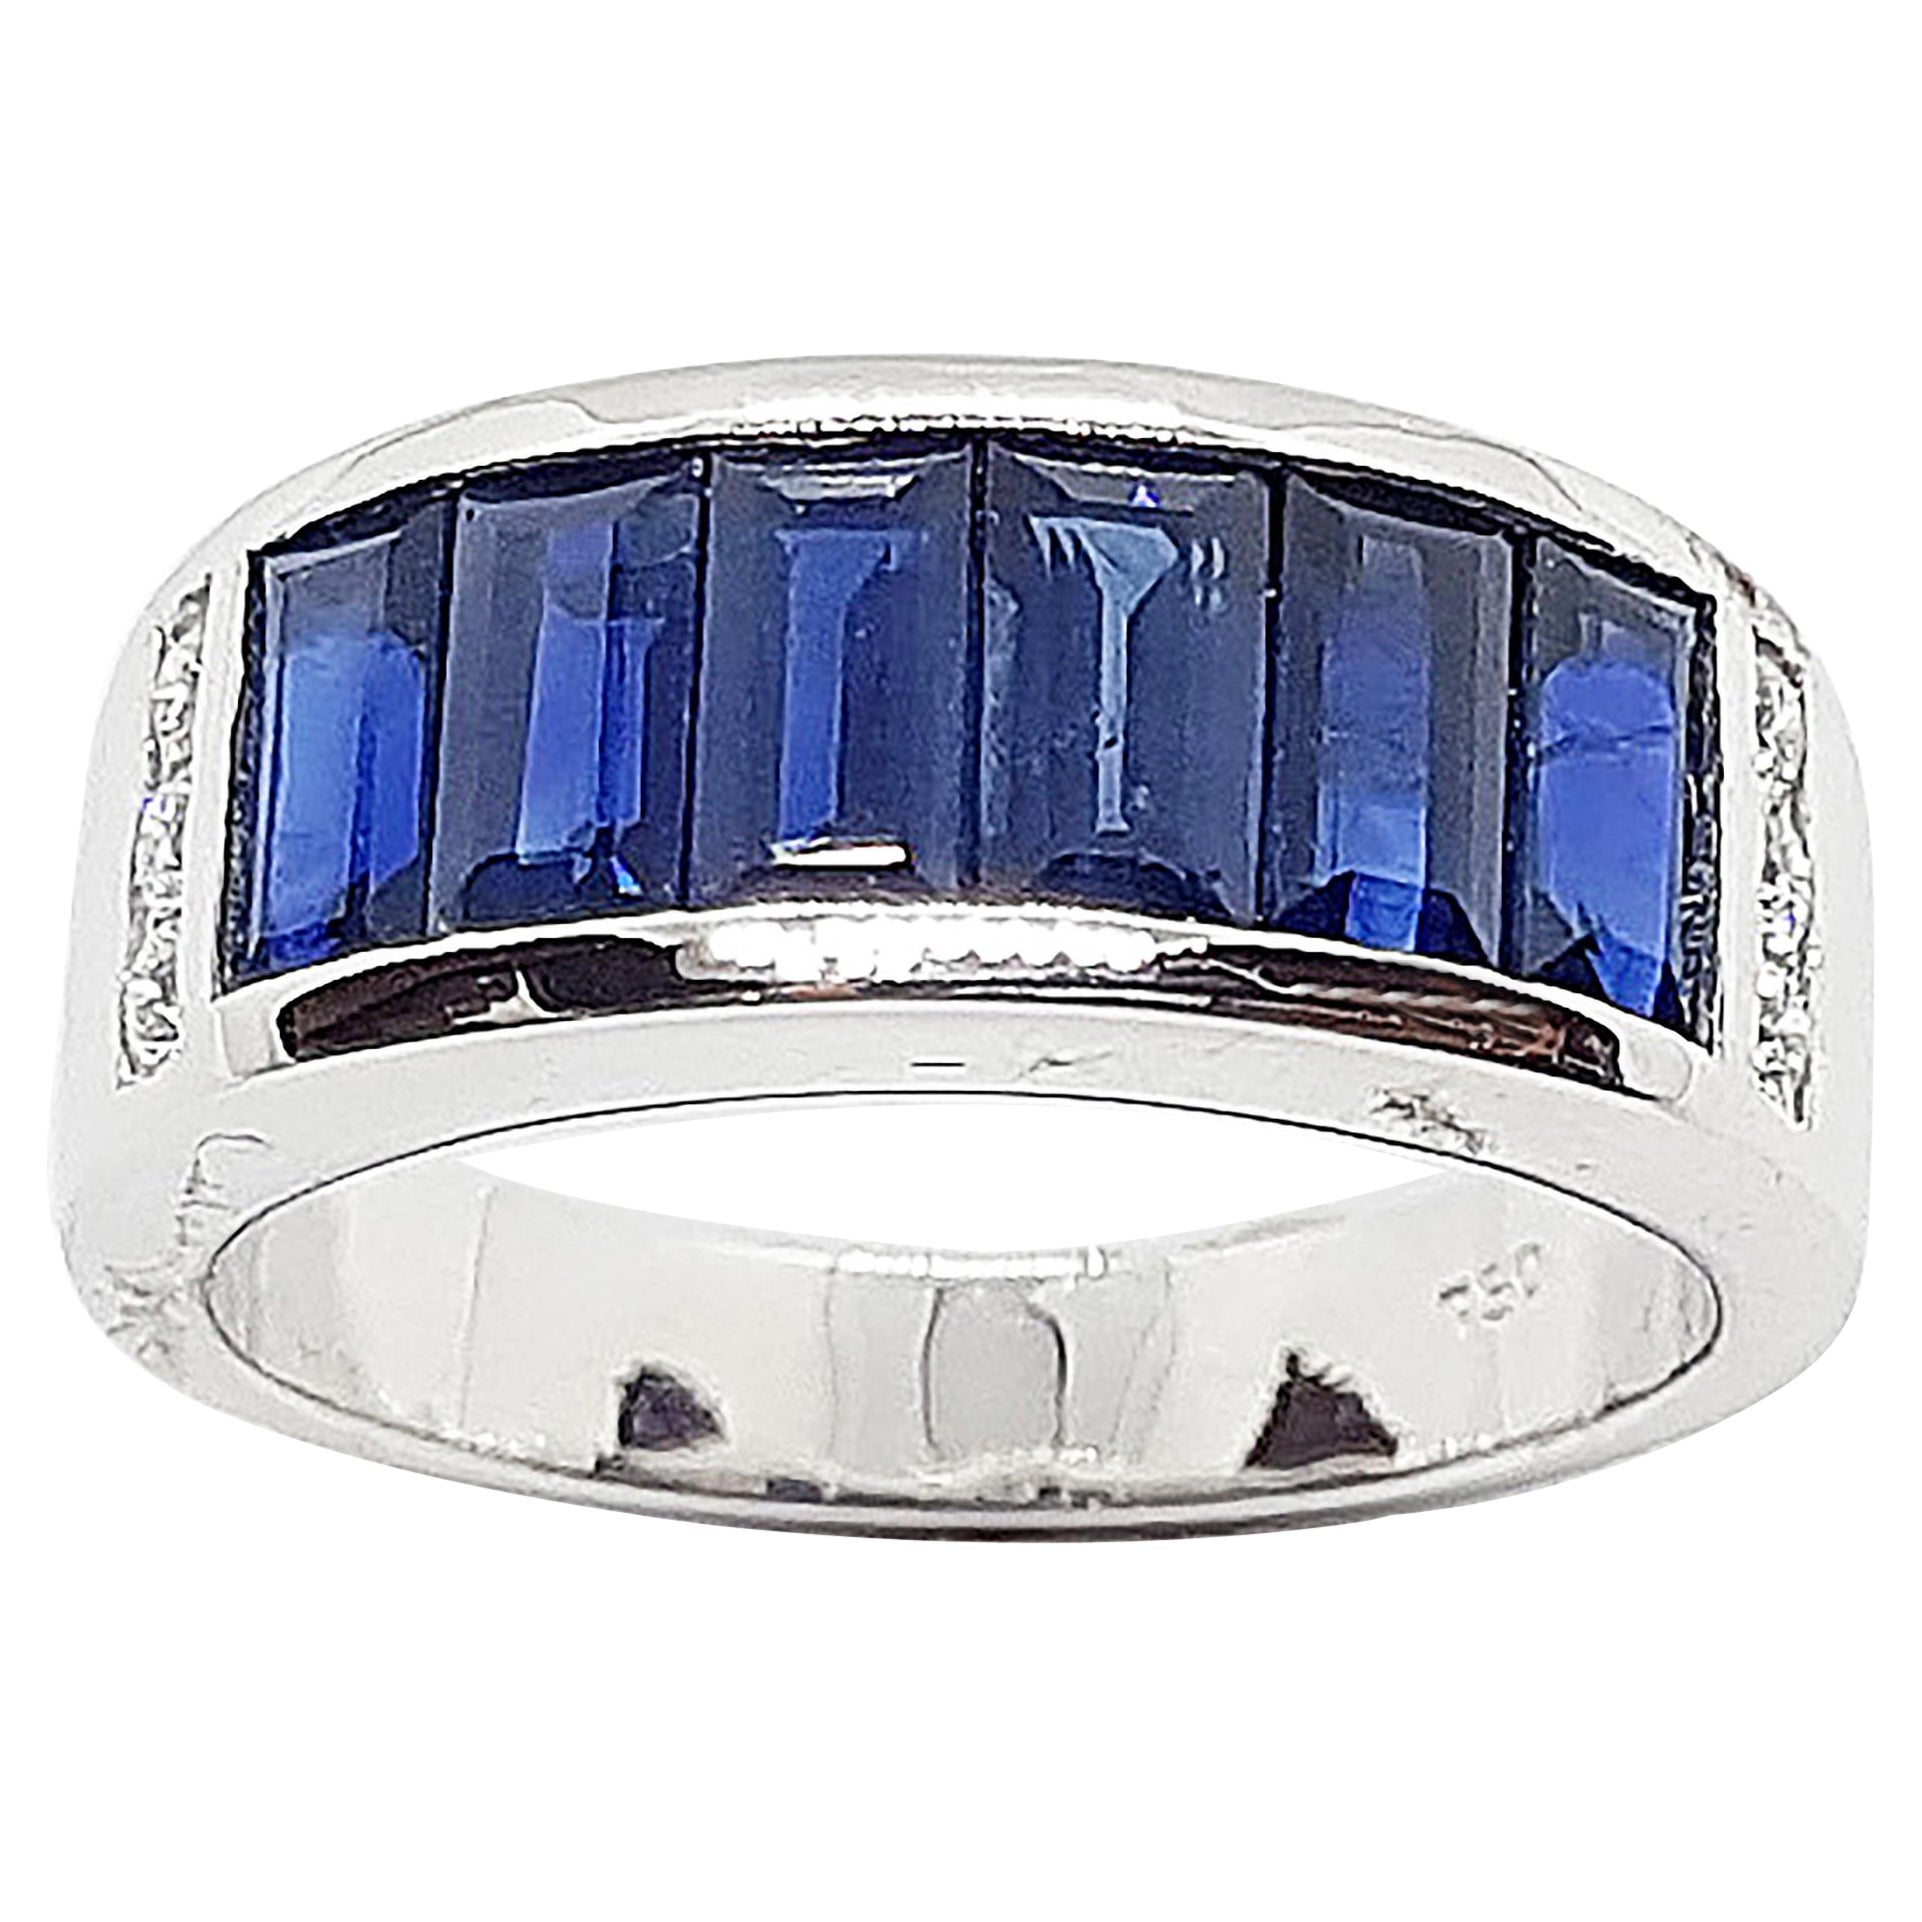 Baguette Blue Sapphire with Diamond Band Ring Set in 18 Karat White Gold 